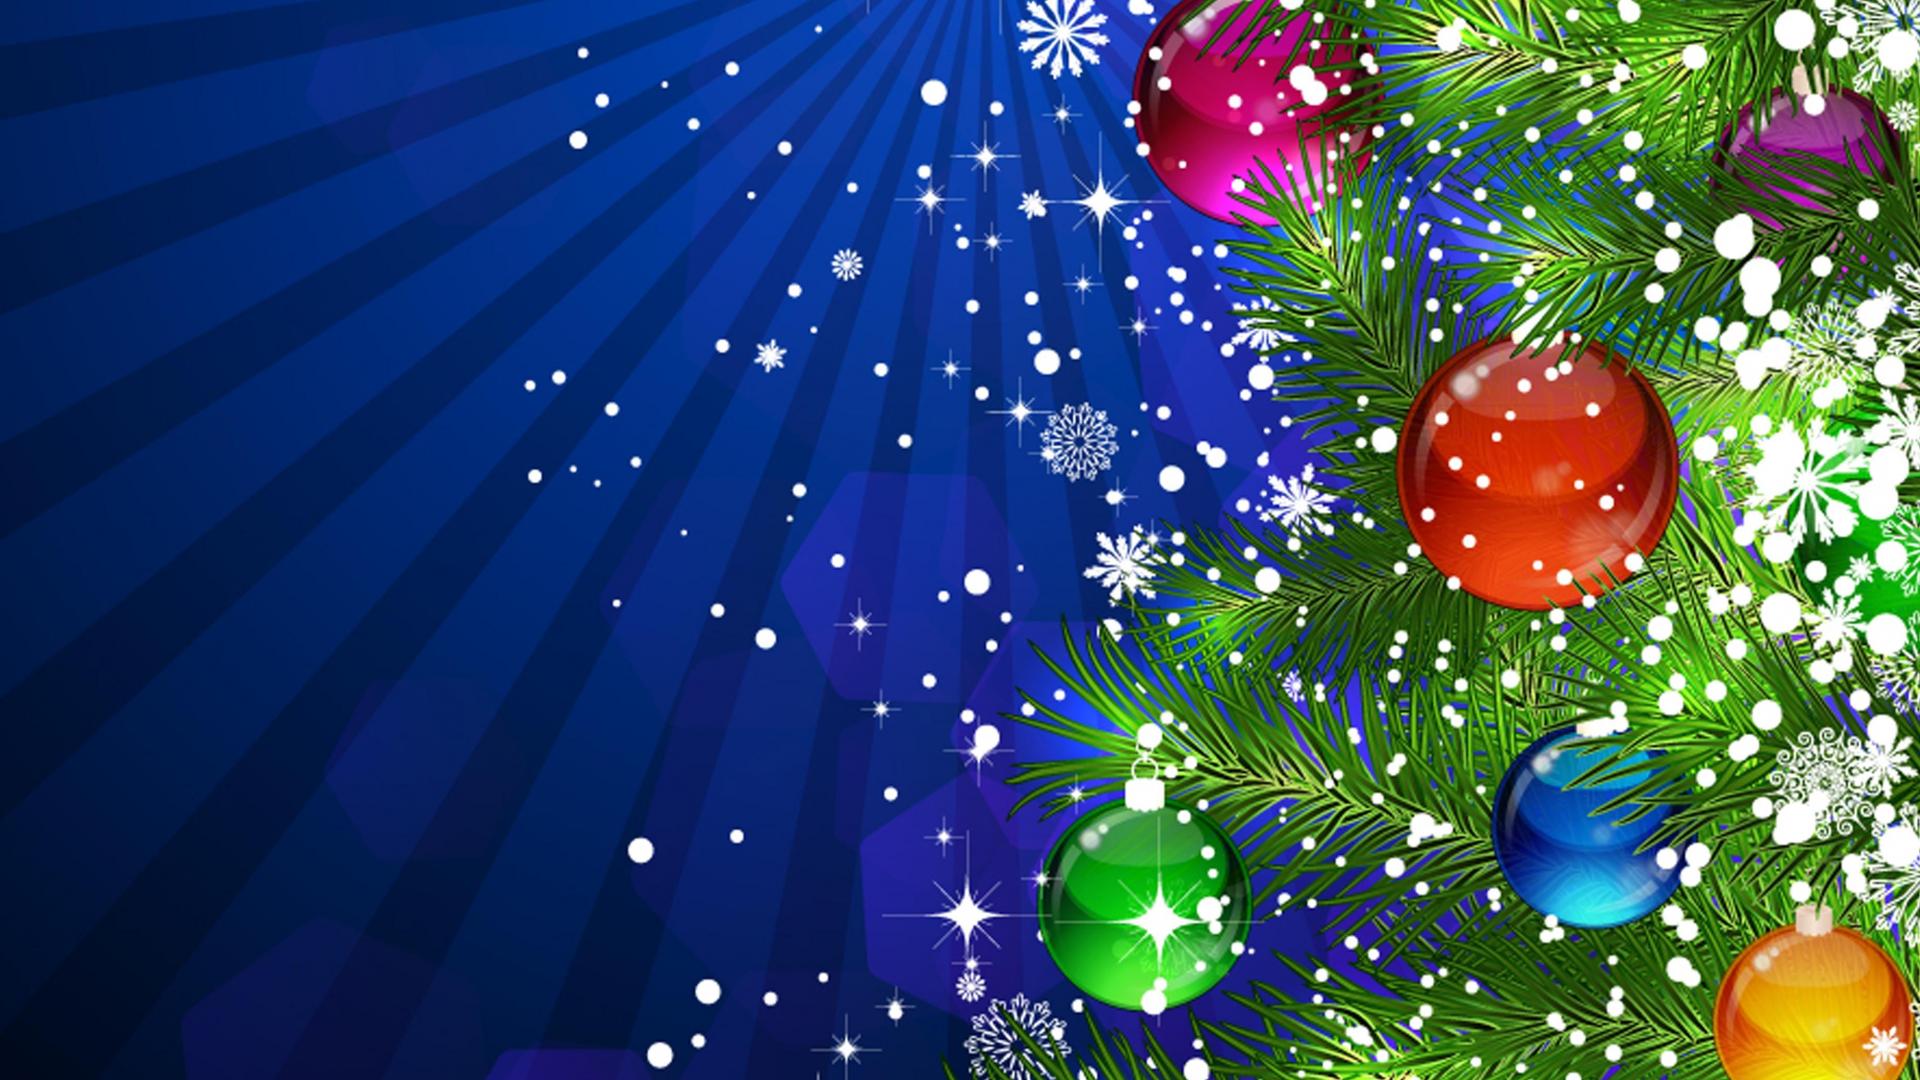 Free Download Merry Christmas Wallpaper Download 19x1080 For Your Desktop Mobile Tablet Explore 47 Merry Christmas Hd Wallpapers Merry Christmas Hd Wallpapers Merry Christmas Wallpaper Merry Christmas Background